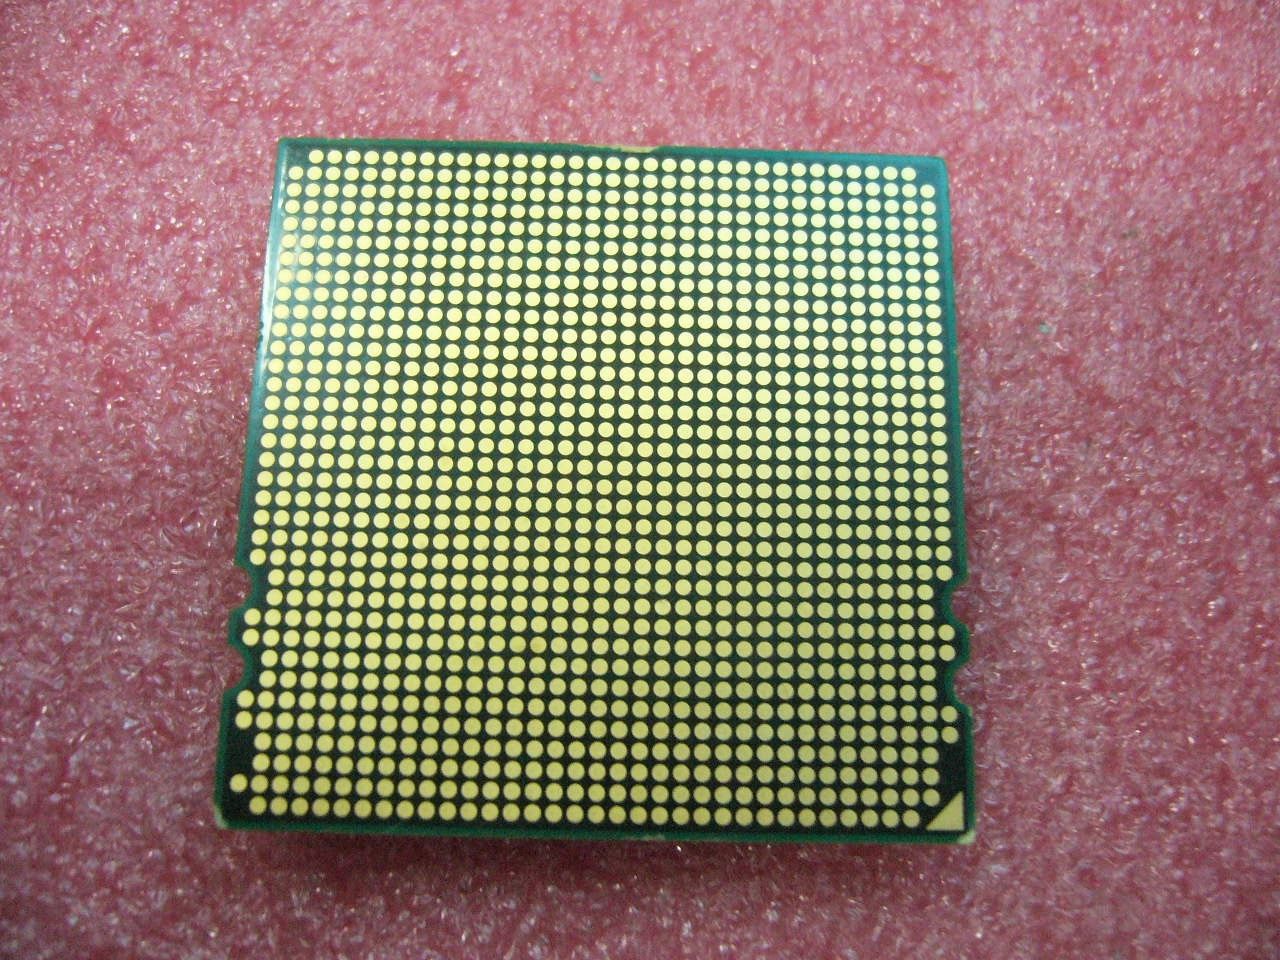 QTY 1x AMD Opteron 8425 2.1 GHz Six Core (OS8425PDS6DGN) CPU Socket F 1207 - Click Image to Close